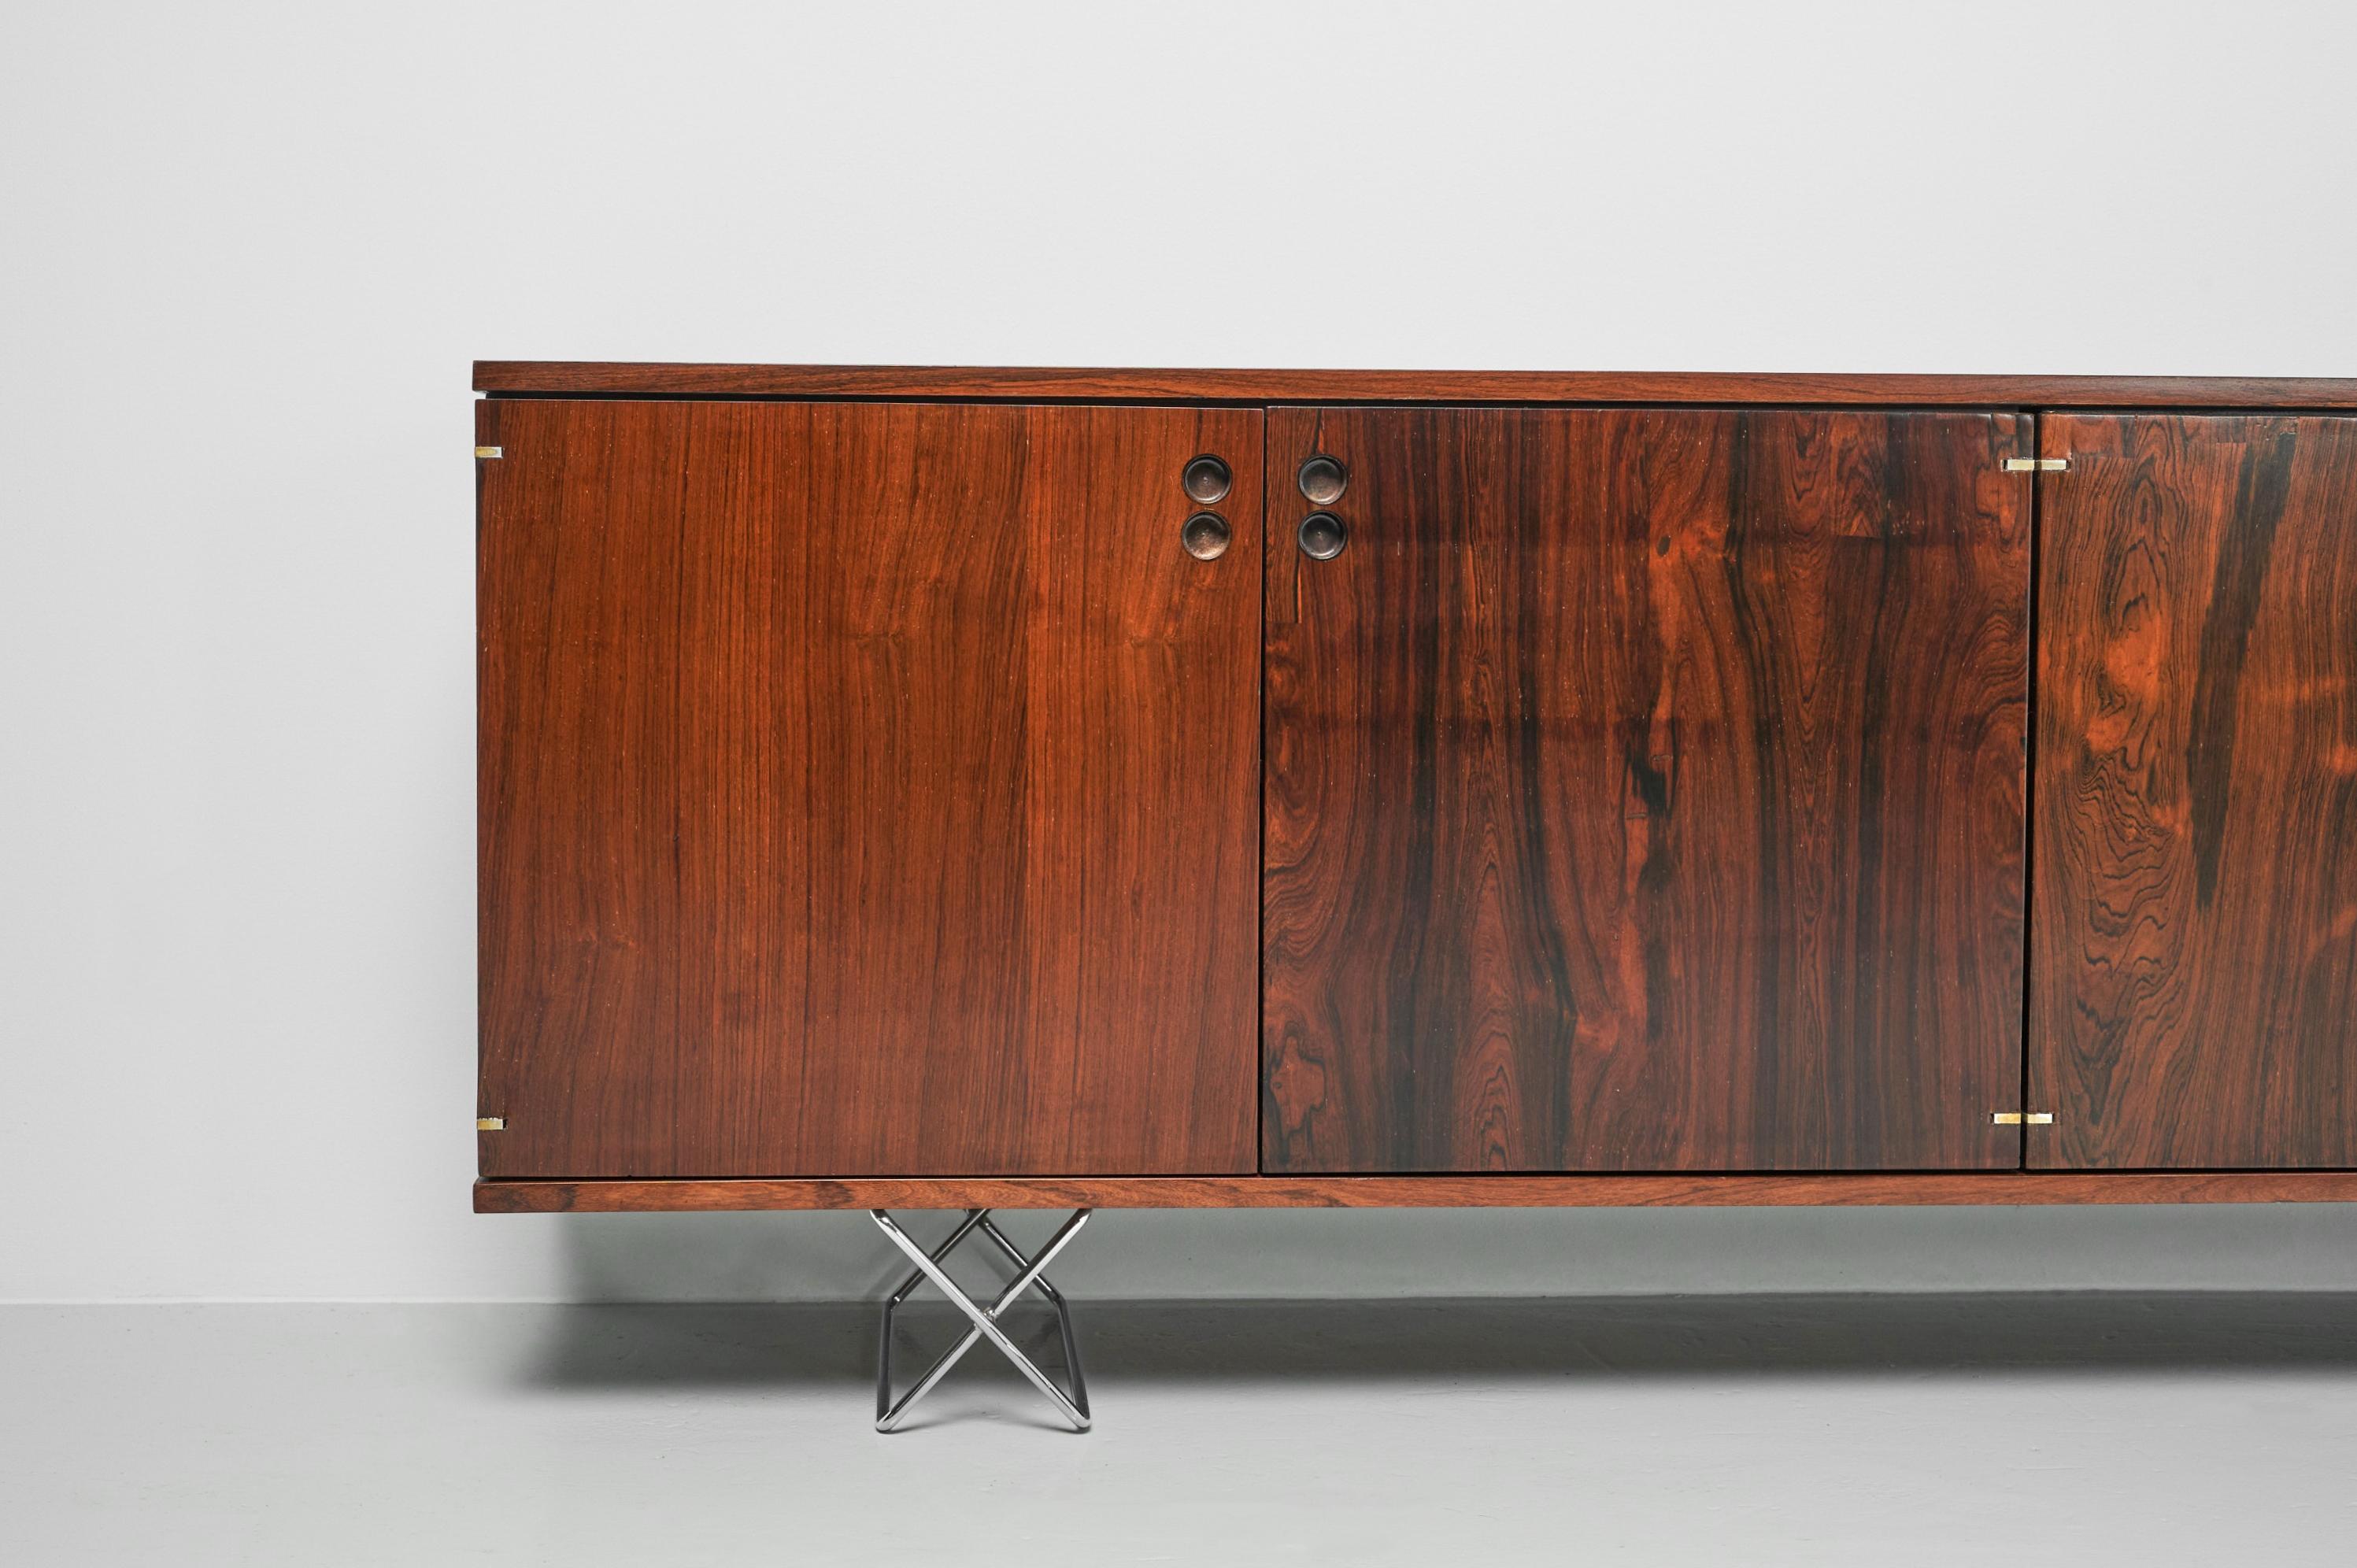 Beautiful and sophisticated sideboard from the componivel series designed by Jorge Zalszupin and manufactured by his own company L'Atelier, Brazil 1959. Modular furniture by Jorge is instantly recognizable, as he was the first one to come up with